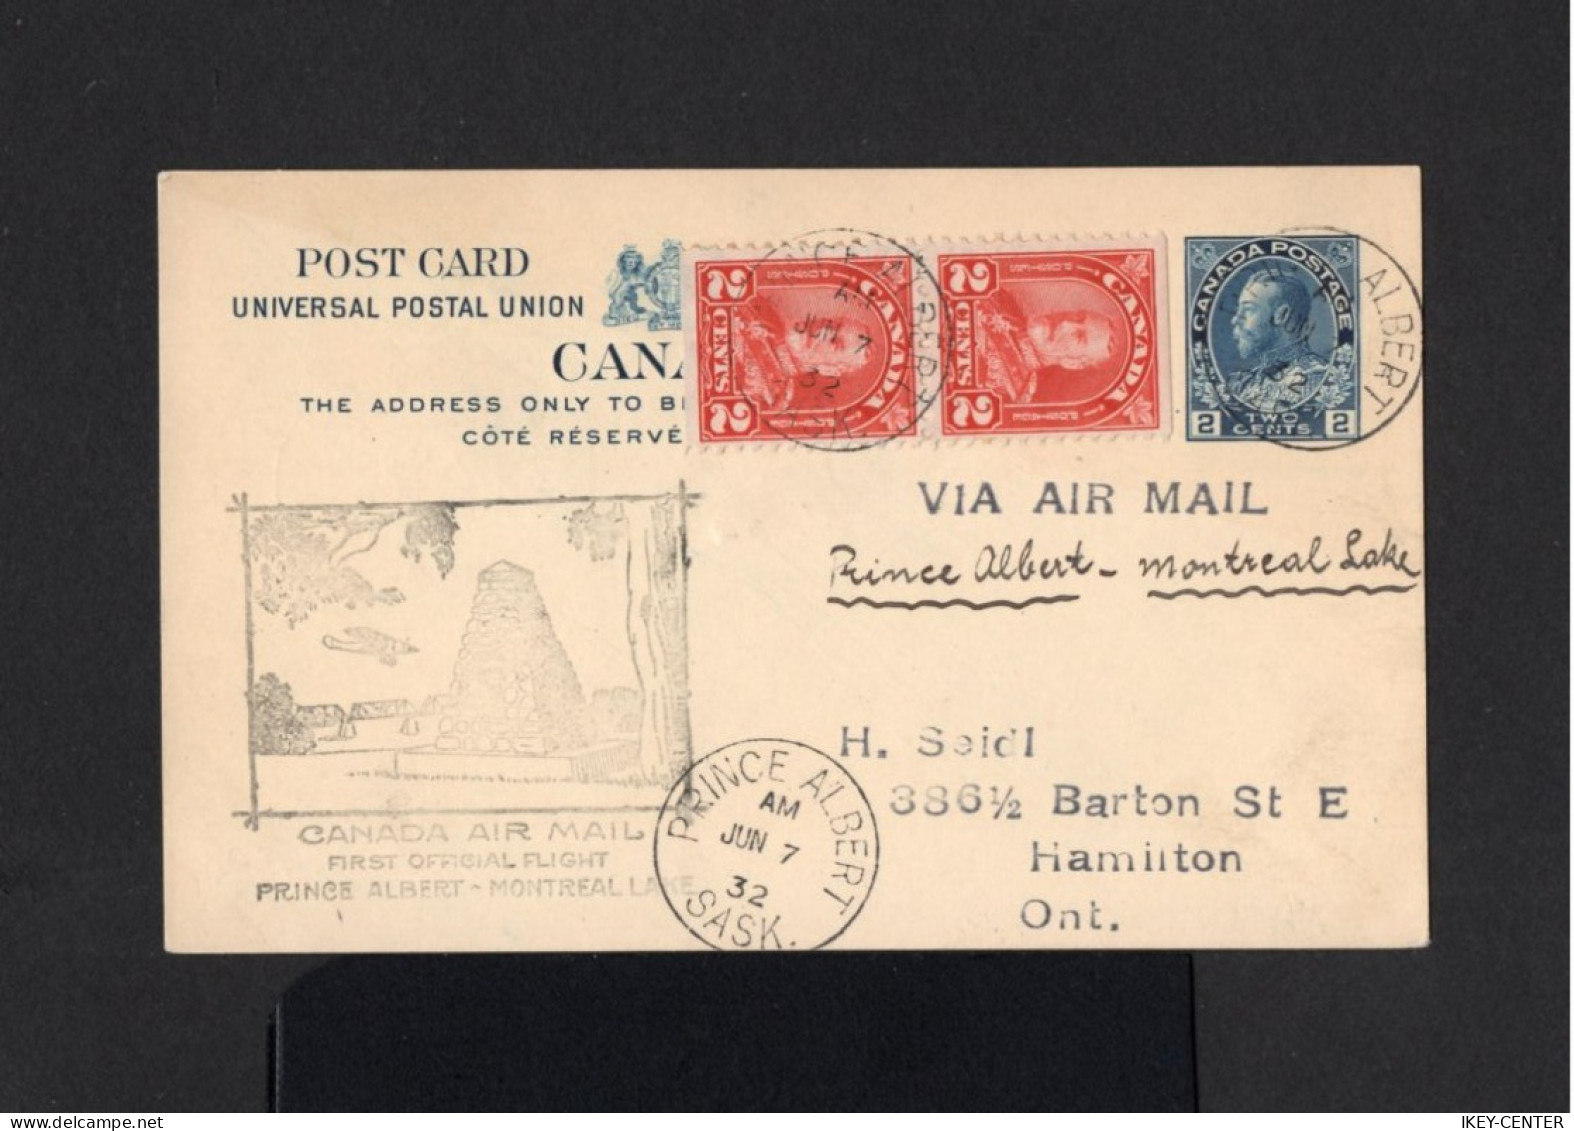 10294-CANADA-AIRMAIL POSTCARD PRINCE ALBERT To HAMILTON (ontario) 1932.WWII.CARTE POSTALE.POSTKARTE.First Flight. - Covers & Documents